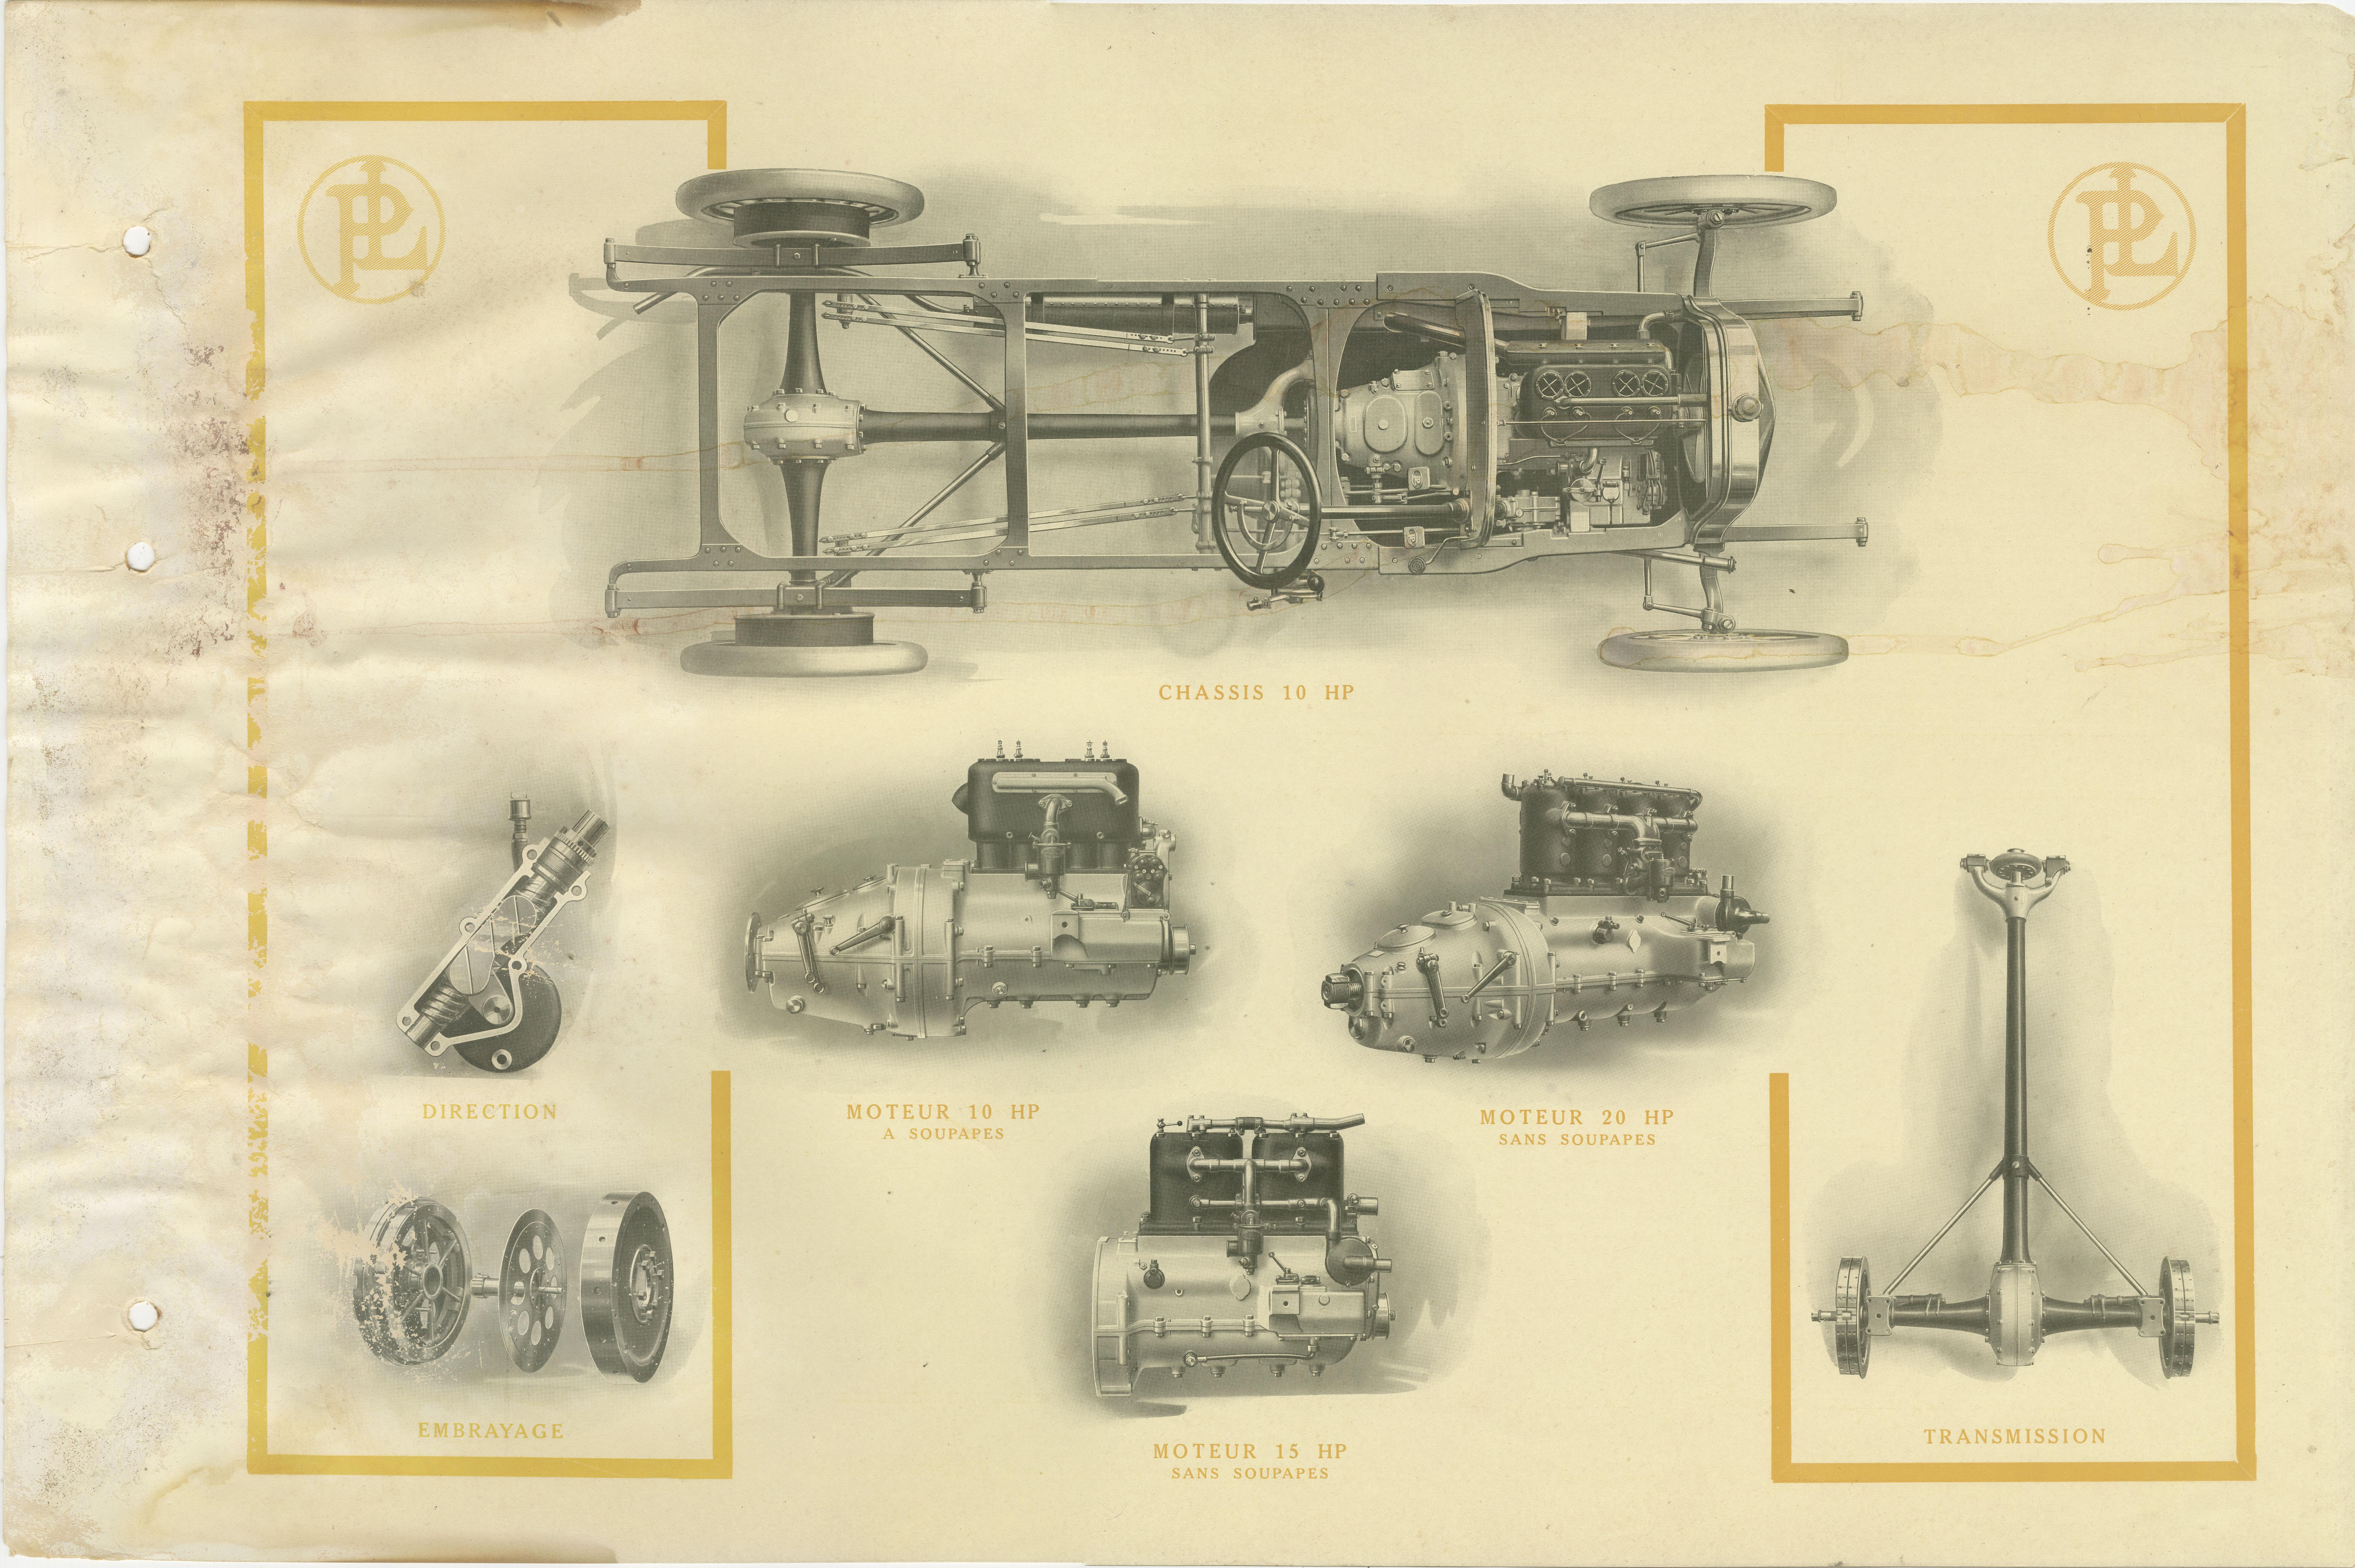 Antique print with illustrations of car parts, double sided. The front shows chassis, car engines and other parts. The verso shows illustrations of various cars with their details. This print originates from a rare catalog of the exclusive French